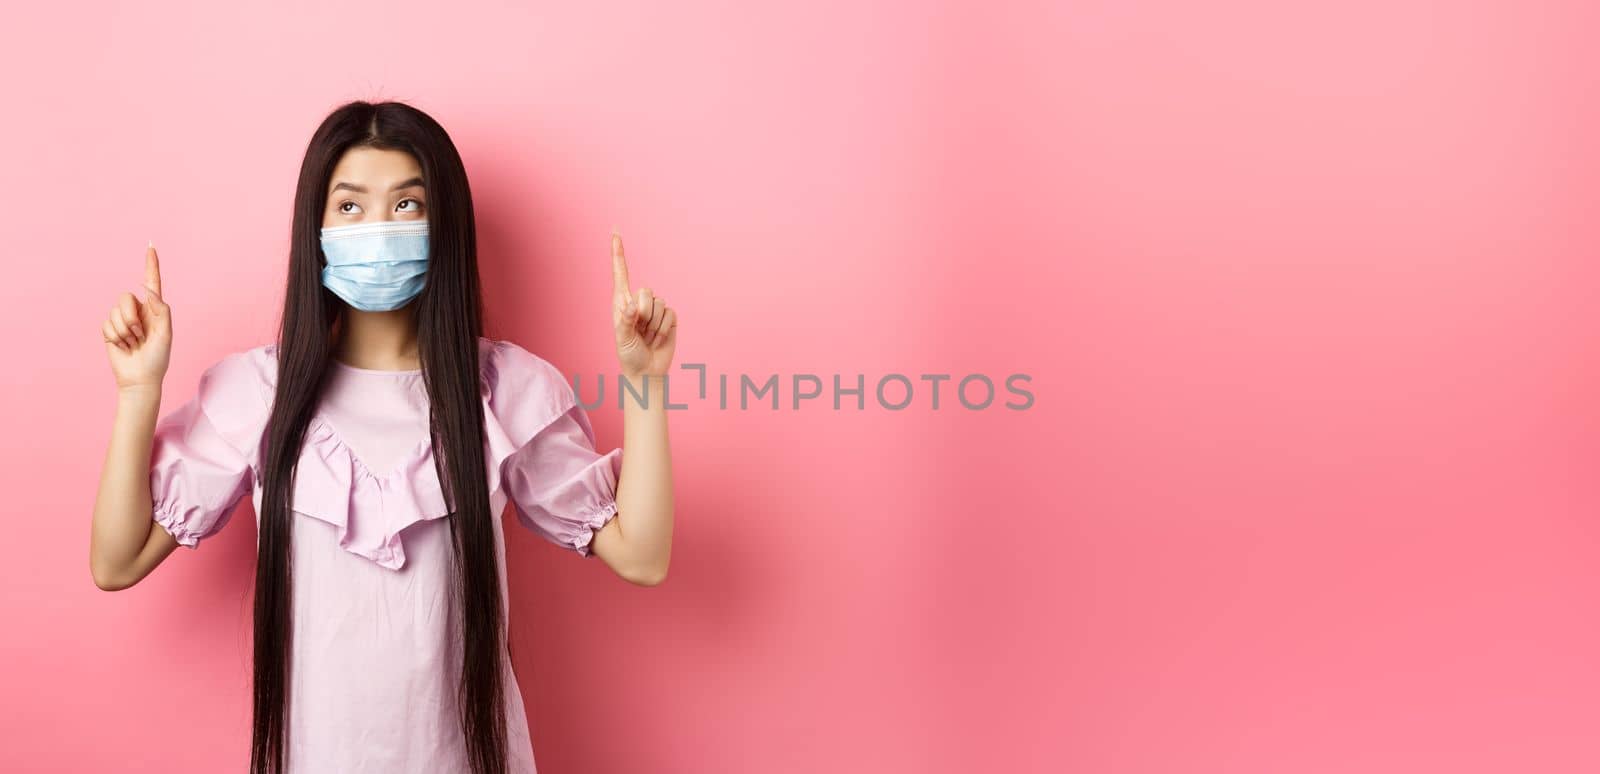 Coronavirus, quarantine and lifestyle concept. Cute korean girl in medical mask pointing fingers up, looking at top advertisement, standing against pink background.